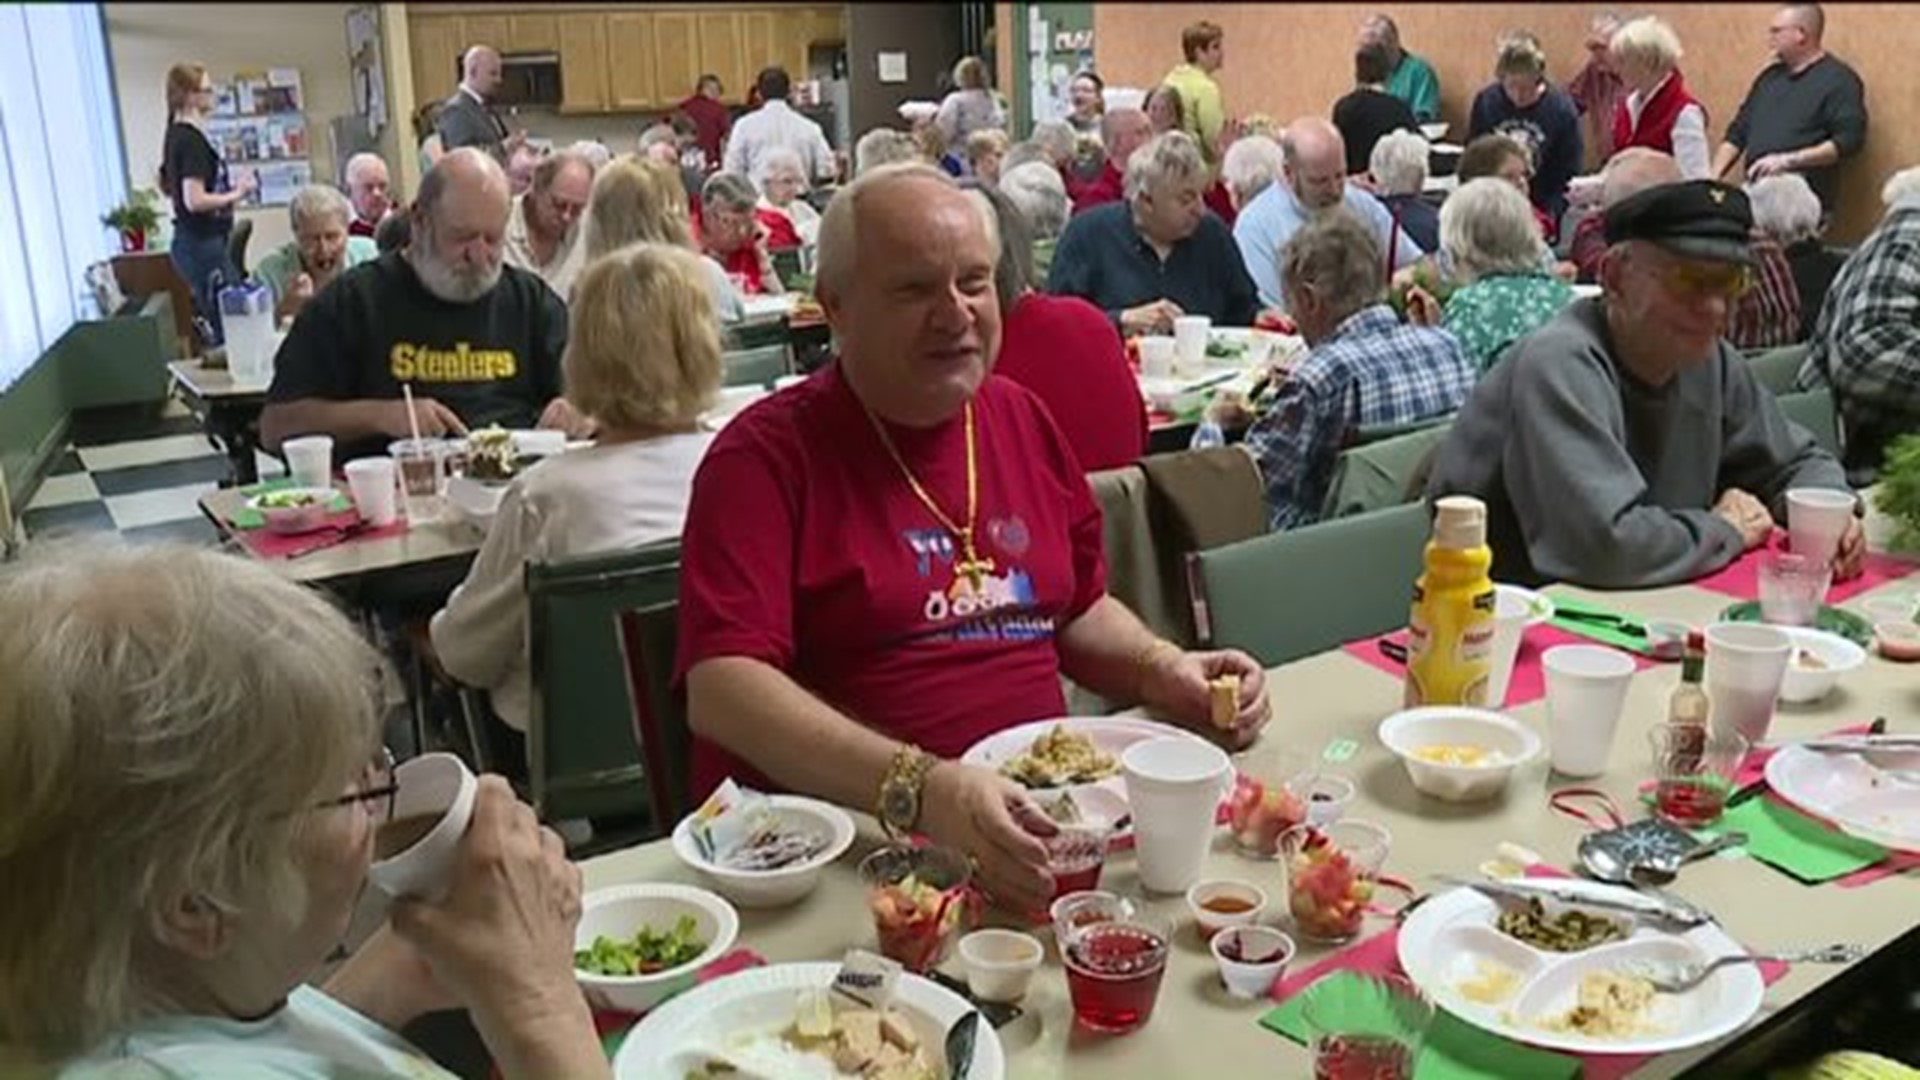 "No one has to eat alone," thanks to Community Christmas in Montrose